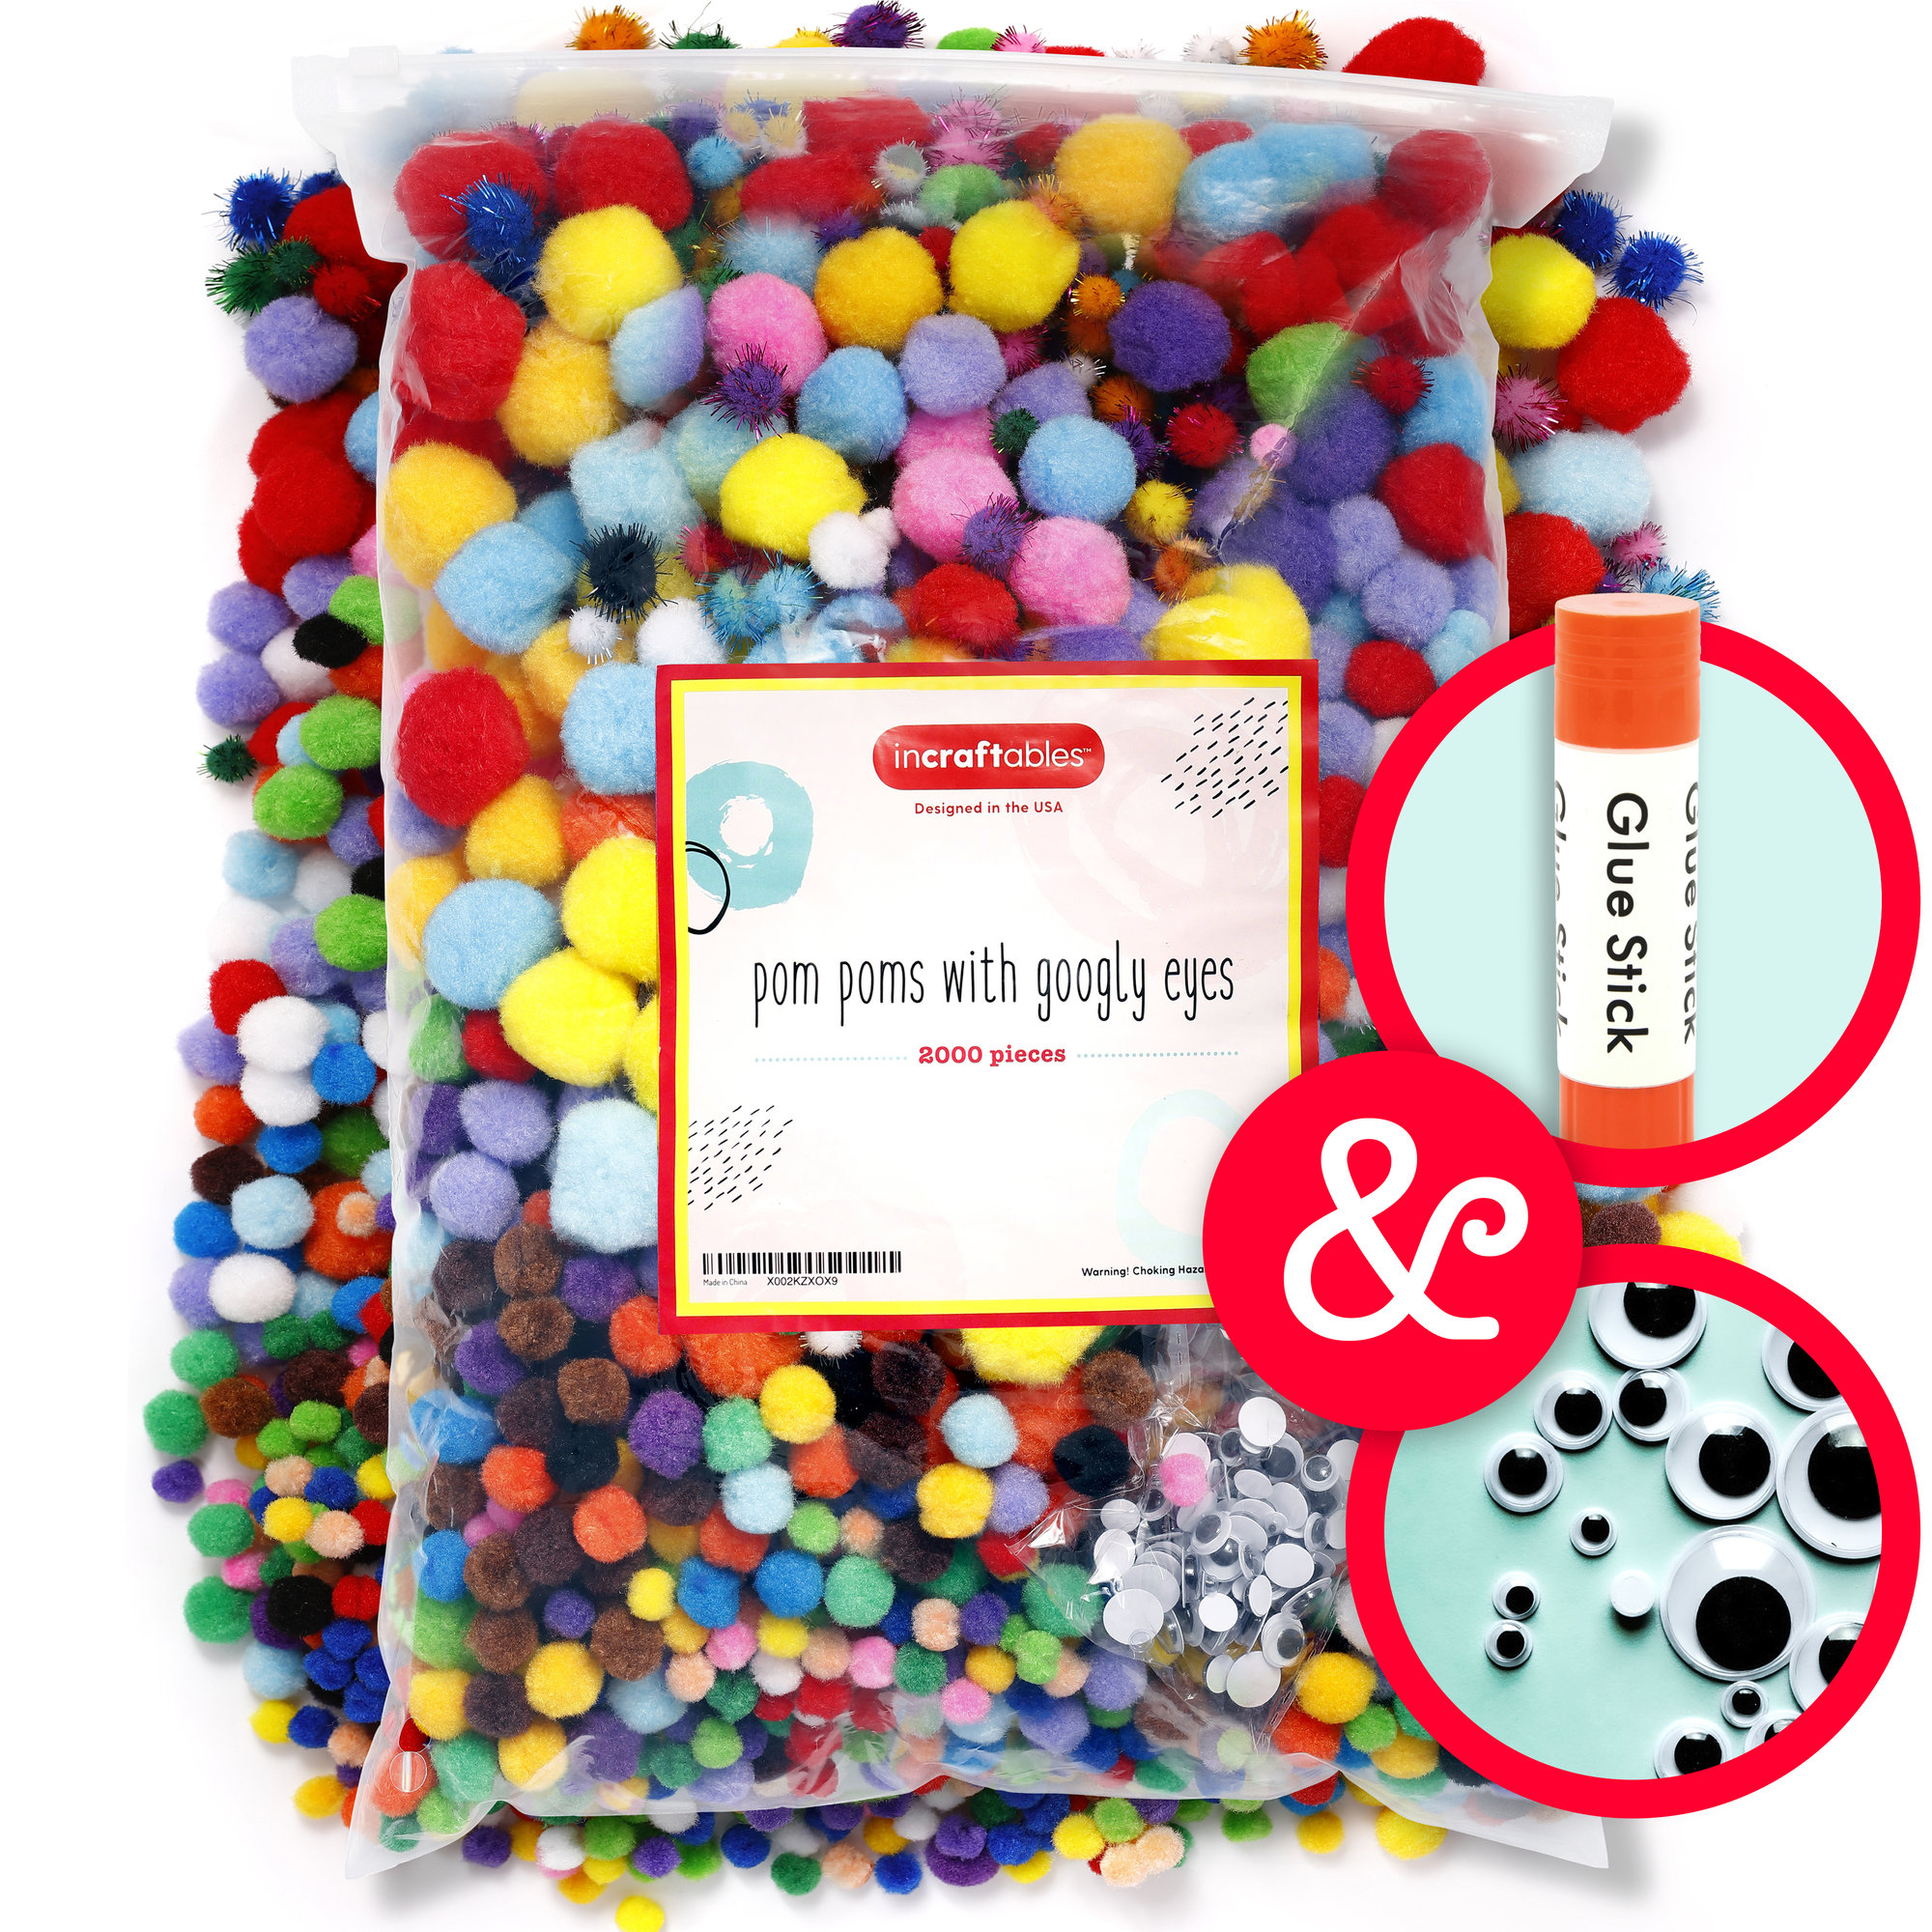 Incraftables 1500 Pcs Pom Poms With Googly Eyes Colored Cotton Balls for  DIY Crafts Arts and Decorations Multicolor Gift Set for Kids Adults 